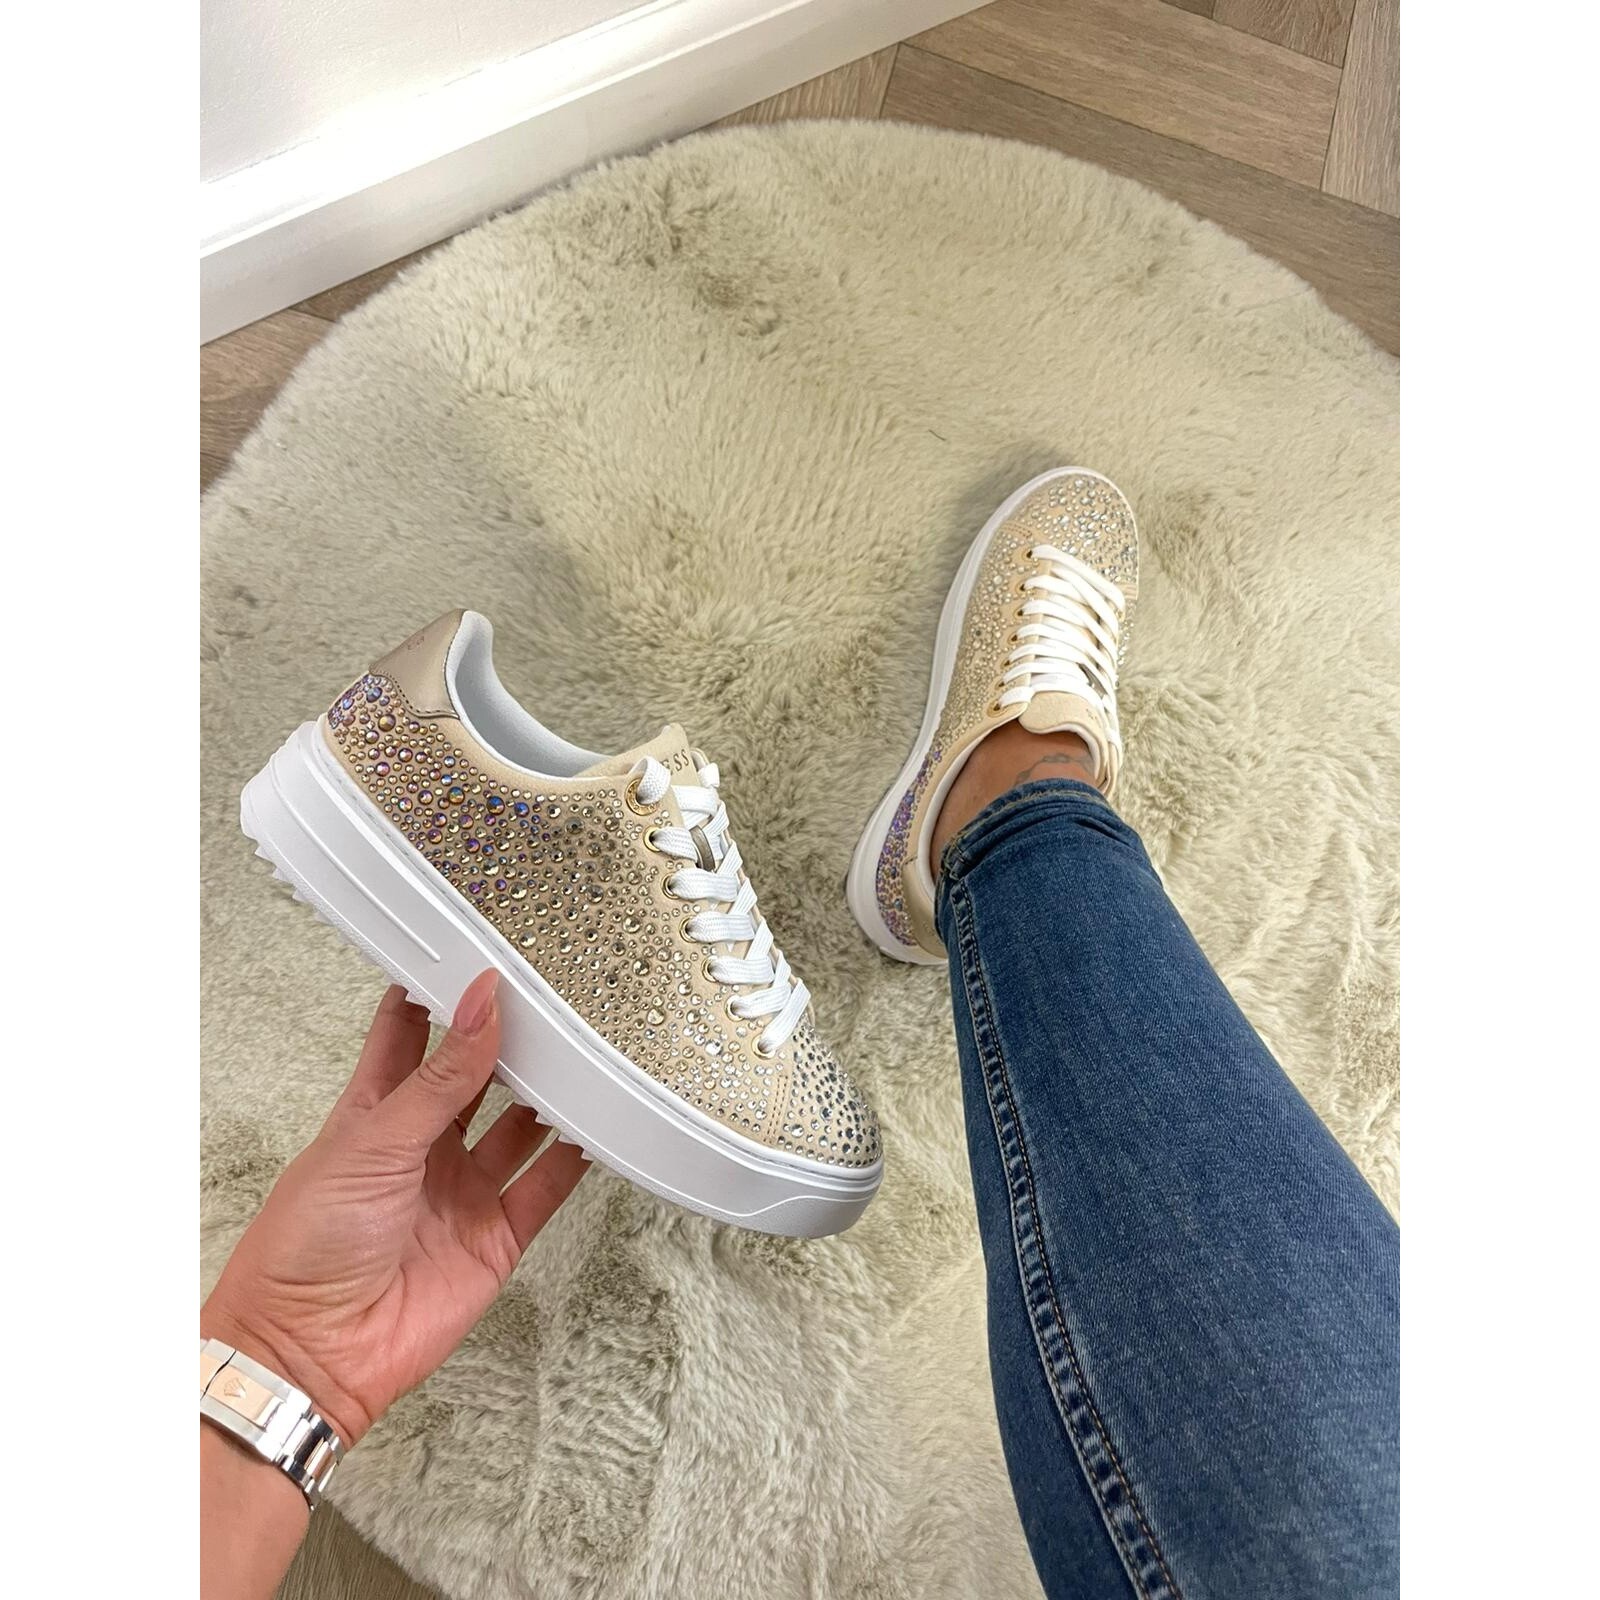 Guess Sneakers  Macy Strass Gold Guess  750